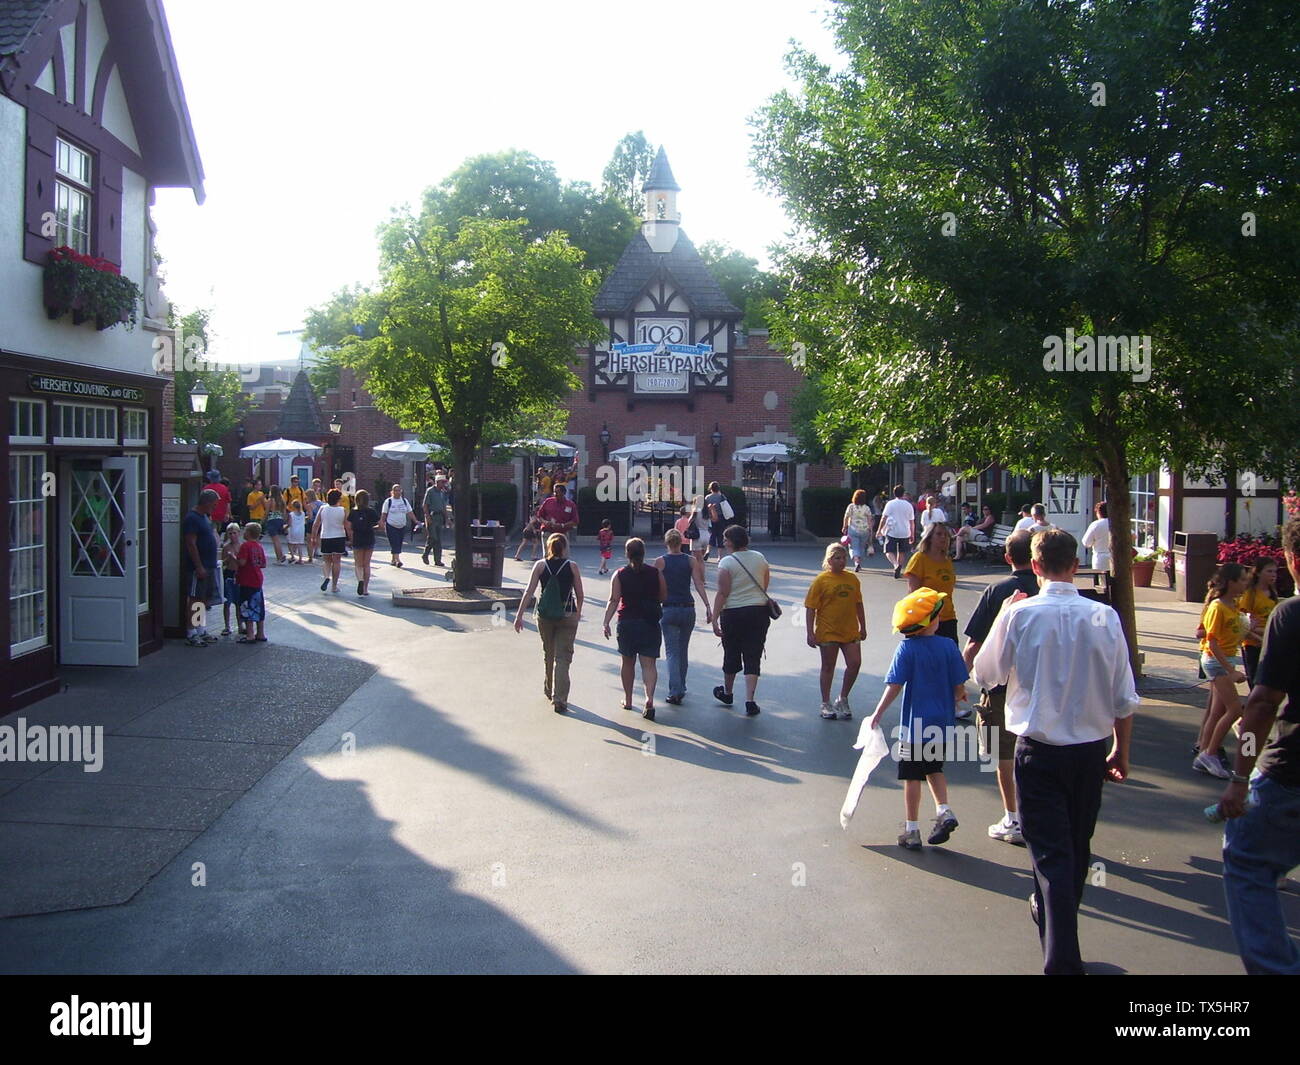 Picture of the Hersheypark exit gate. I took this photo myself on July 17, 2007 in Hershey, PA.; Own work by the original uploader; Wt90401; Stock Photo